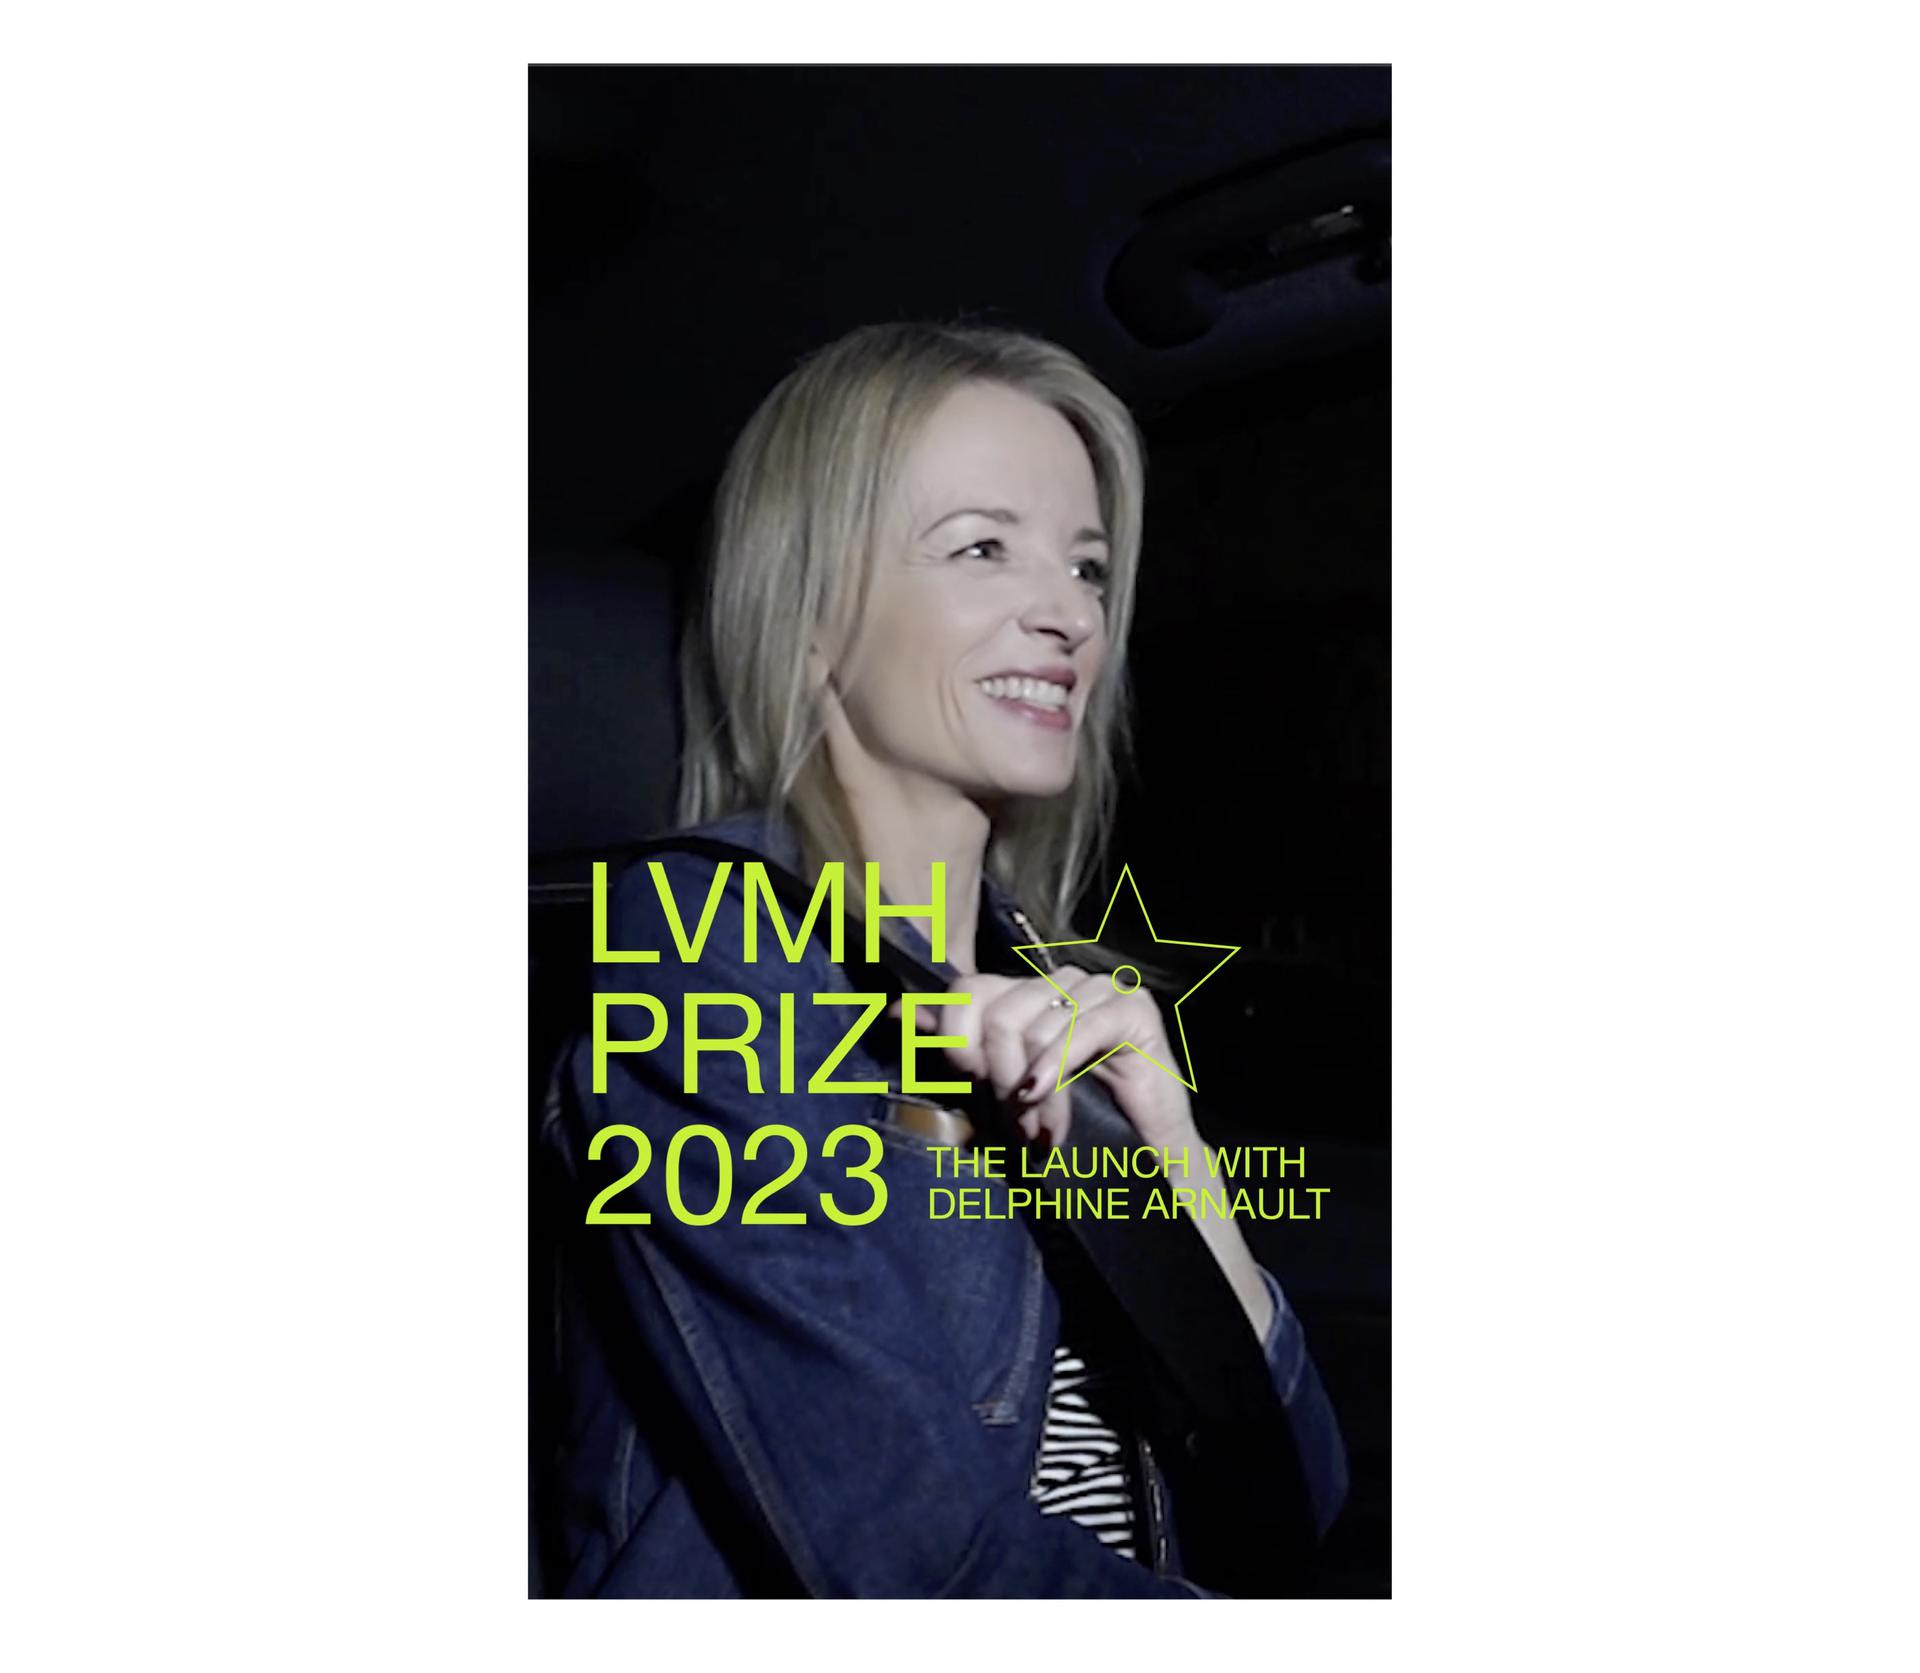 LVMH celebrates 25 years of promoting young Fashion Designers